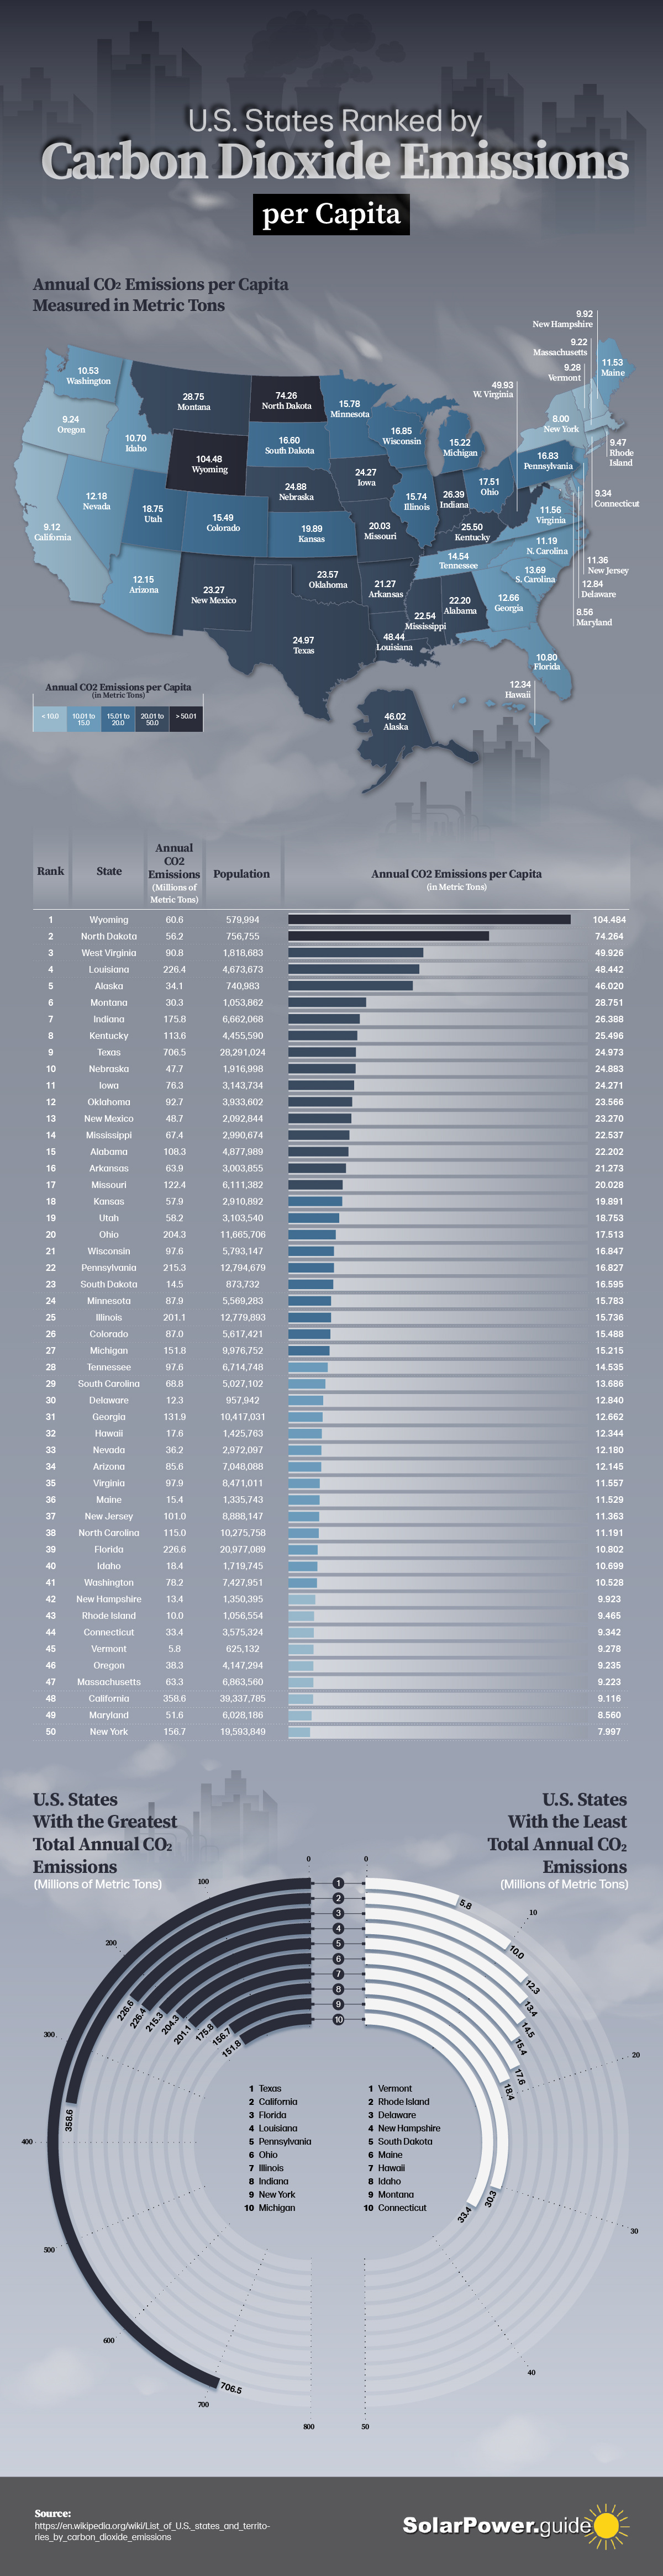 U.S. States Ranked by Carbon Dioxide Emissions #Infographic